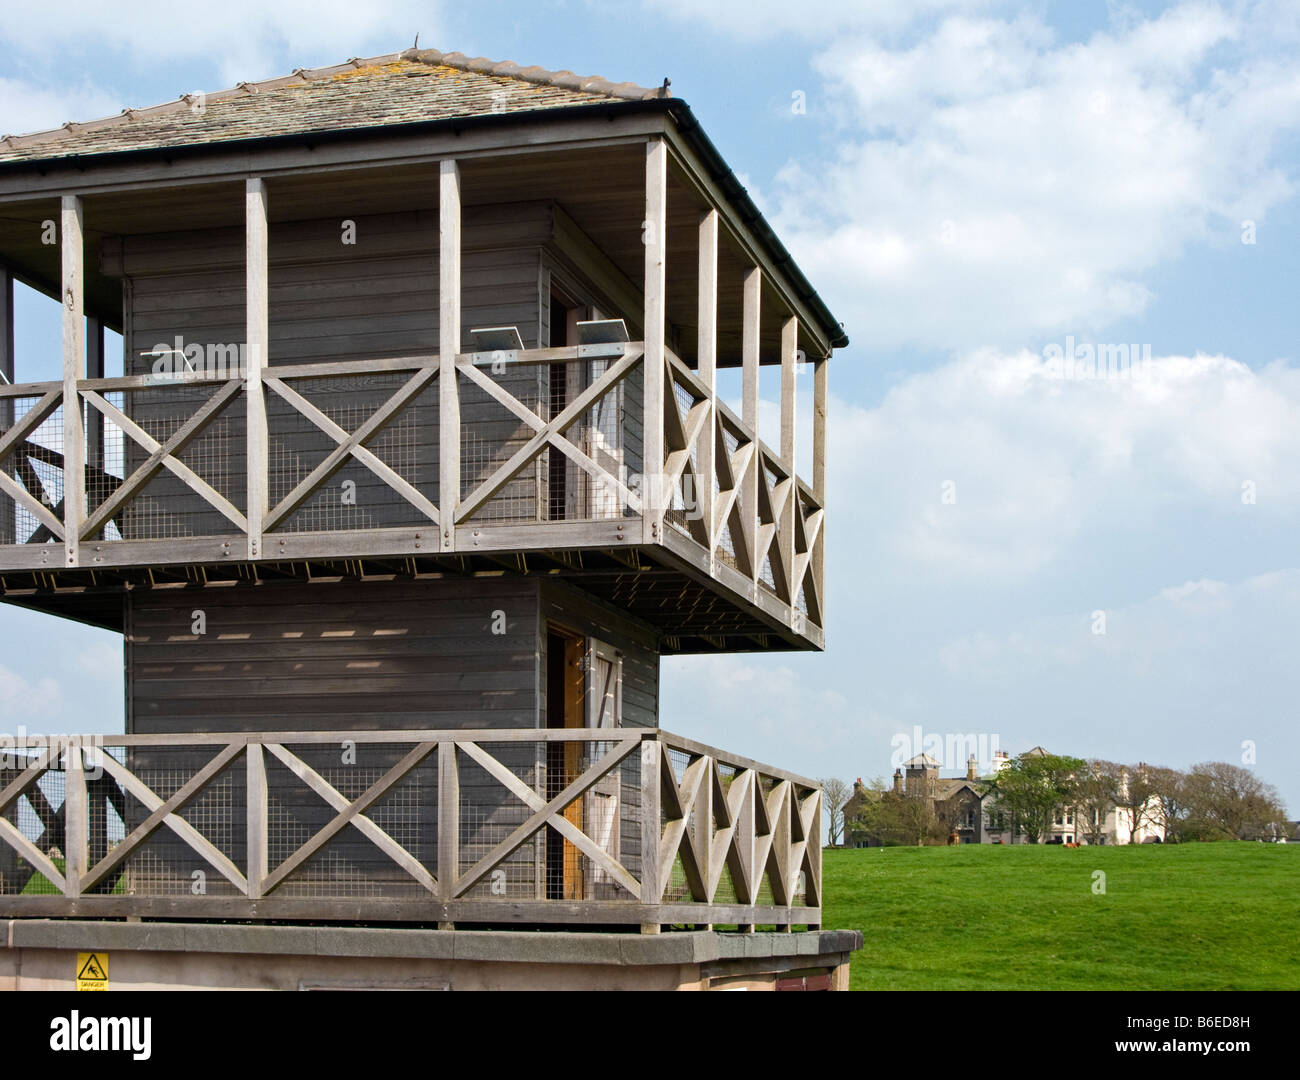 The observation tower at Senhouse Roman Museum over looking the Roman Fort Alauna and towards Camp Road and Camps farm Stock Photo